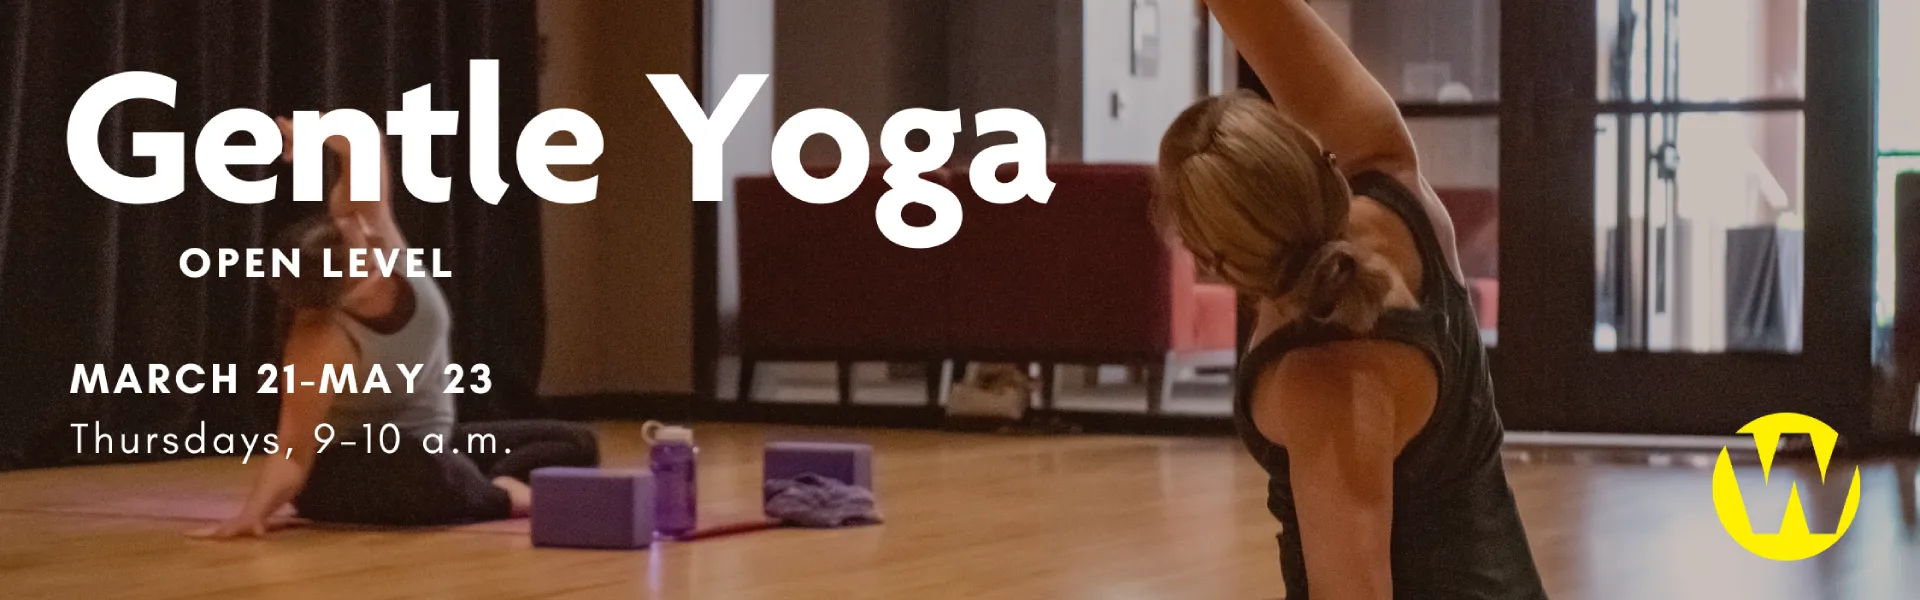 Gentle Yoga Class for Adults at the Wortham Center 